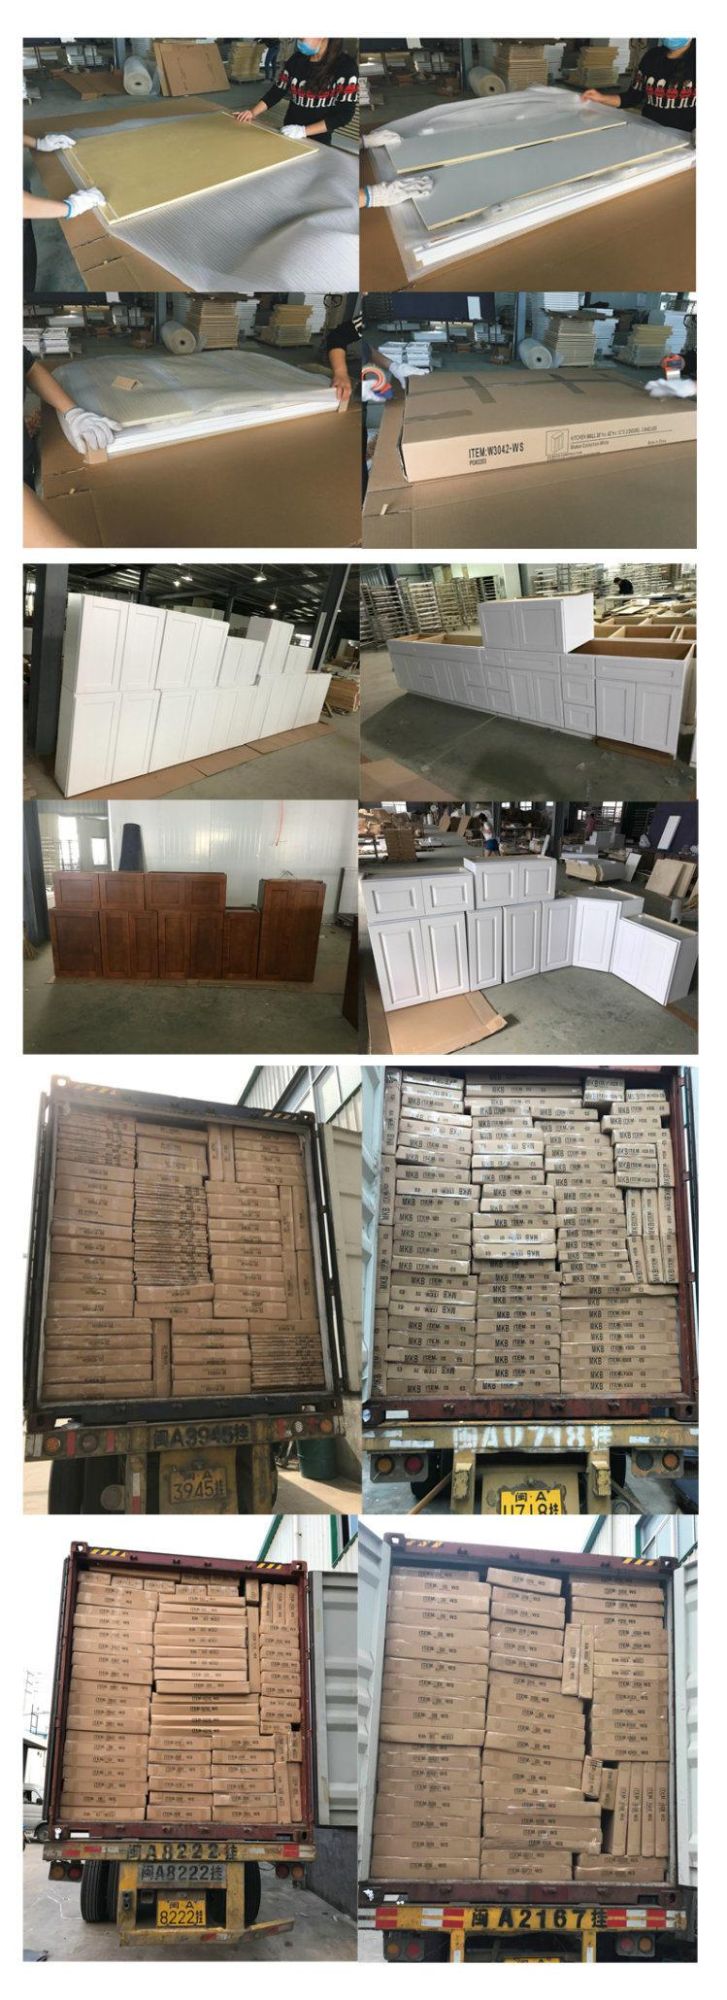 High End Antique White Solid Wood Kitchen Cabinet Soft Closed